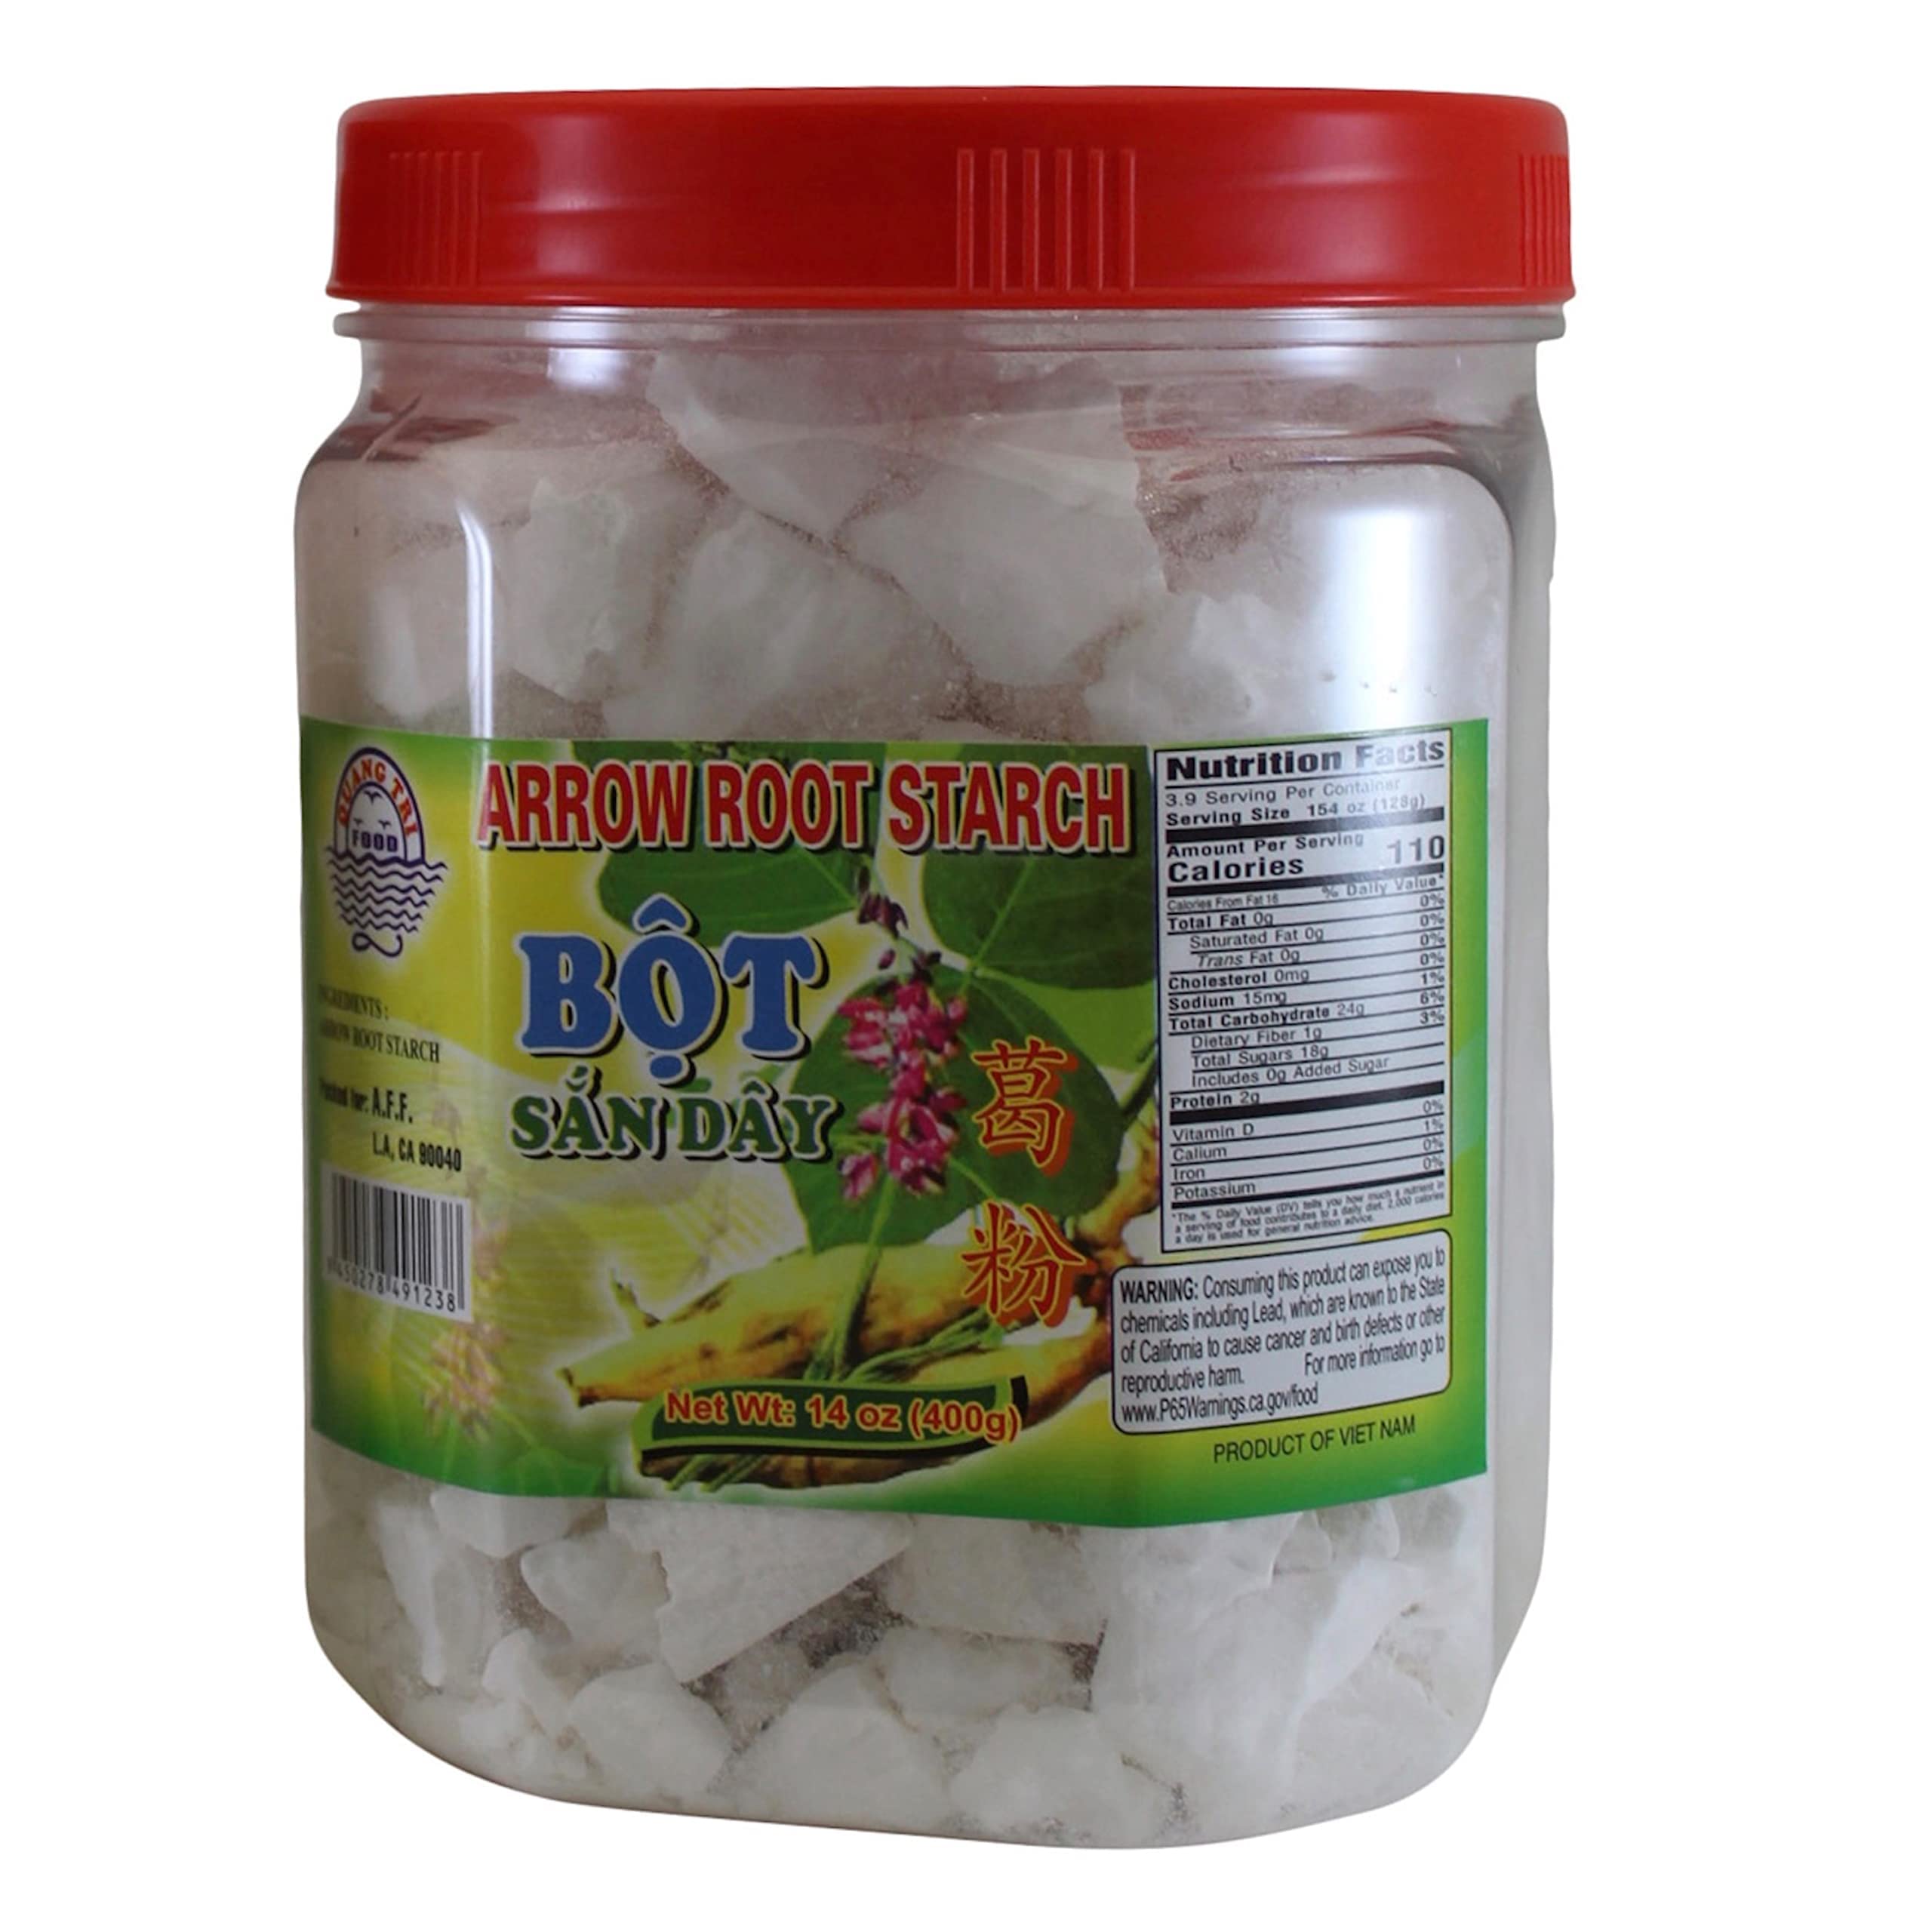 Quang Tri Arrowroot Bot San Day Asian Thickener. Snack Sized Chunks of  Crunchy Arrow Root Starch, 14 oz Jar. 